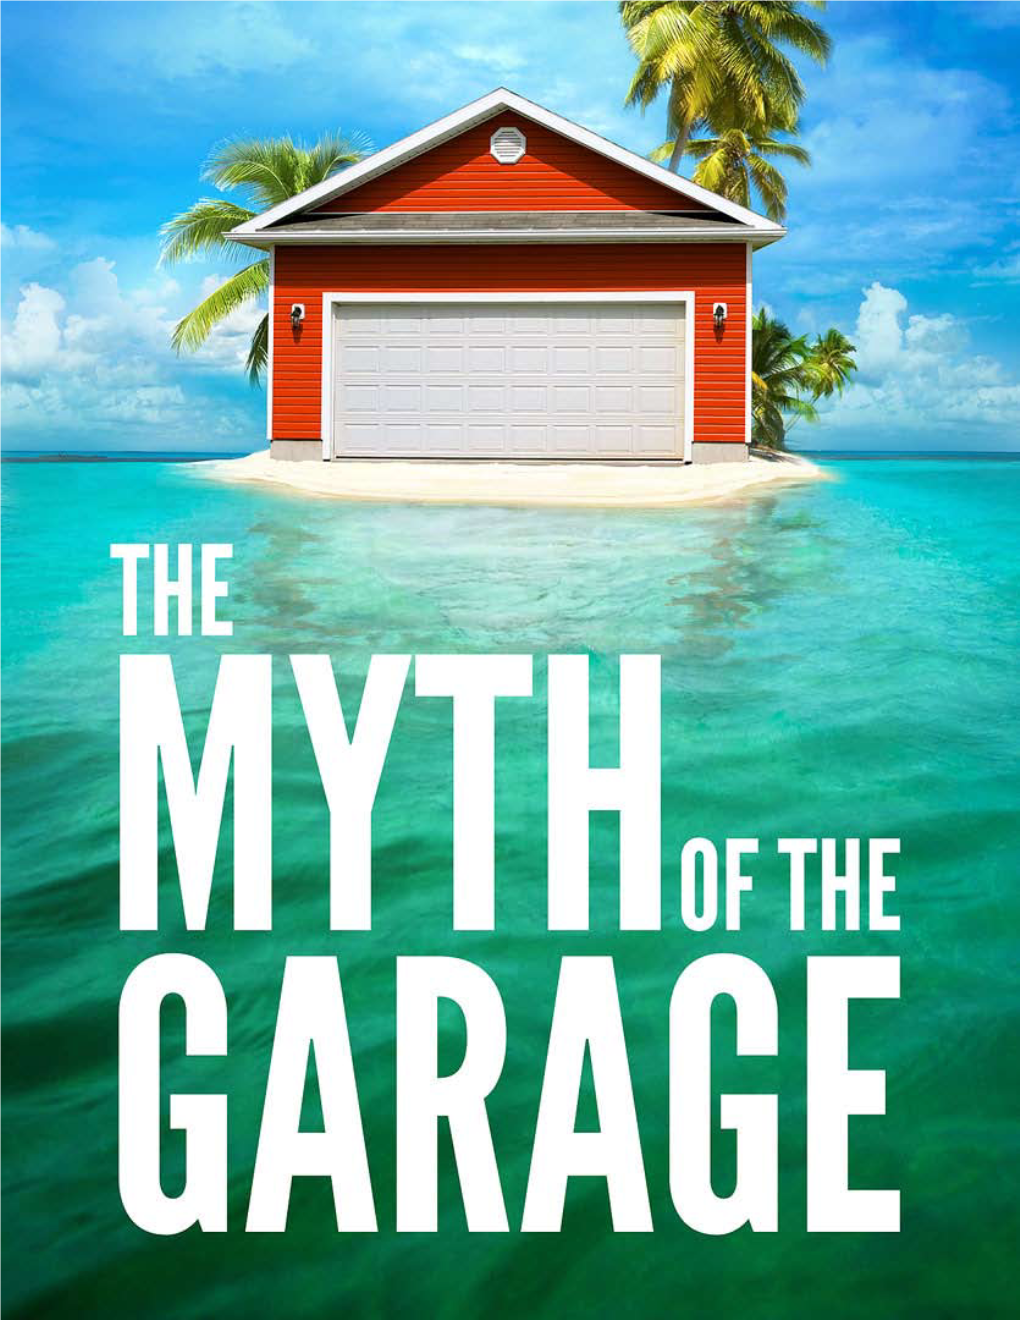 The Myth of the Garage and Other Minor Surprises by Dan Heath and Chip Heath